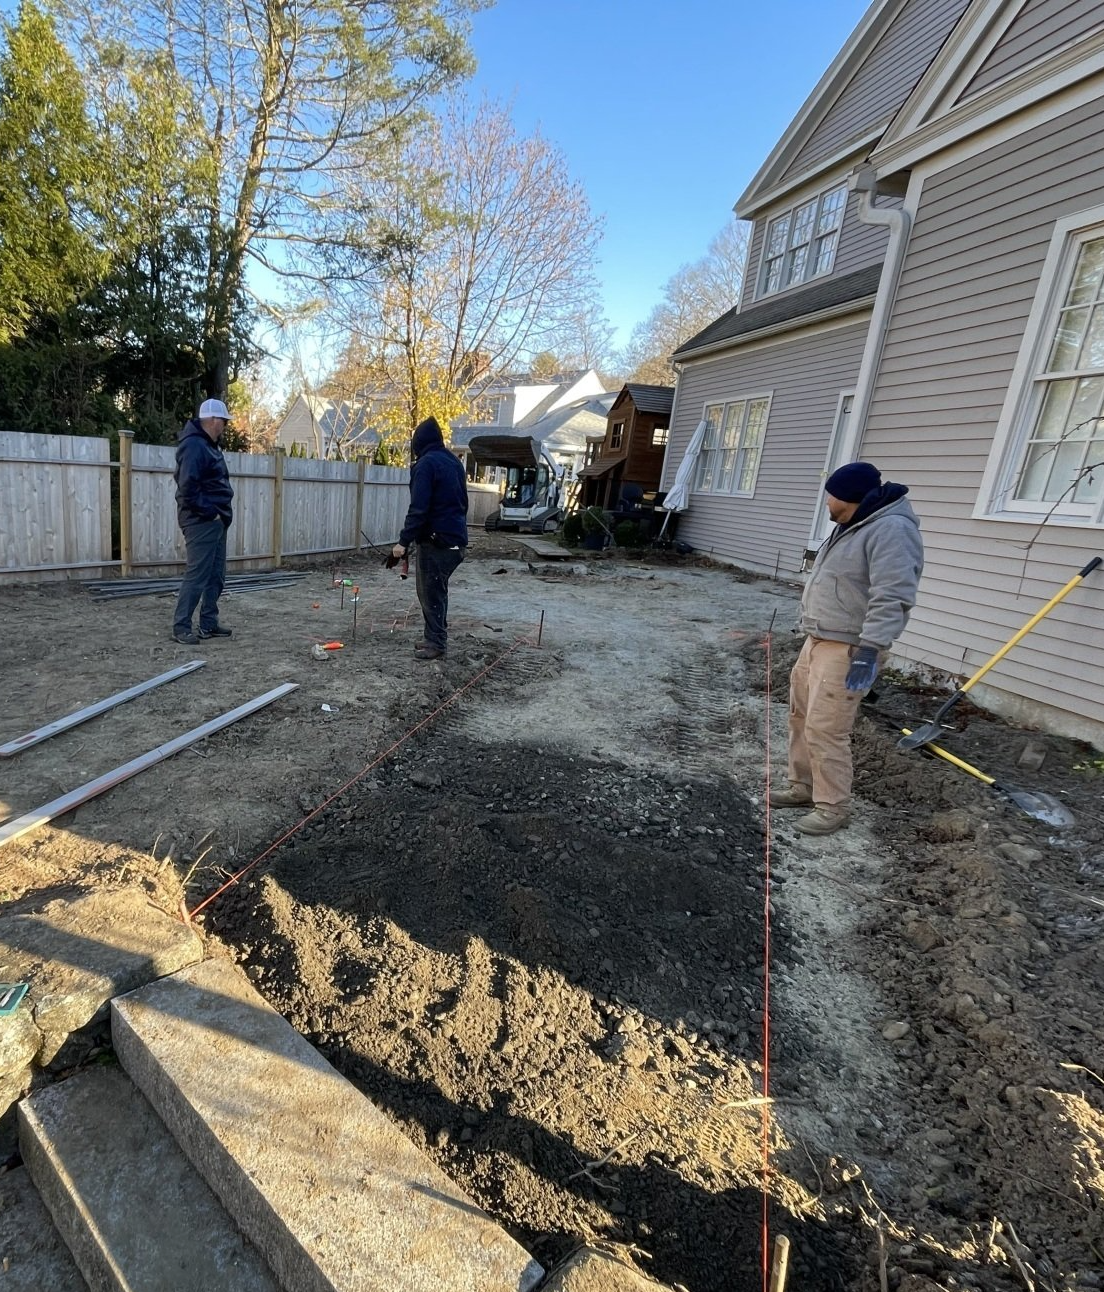 Professional patio and hardscaping contractors. Patio and walkway project in Lexington, MA. 